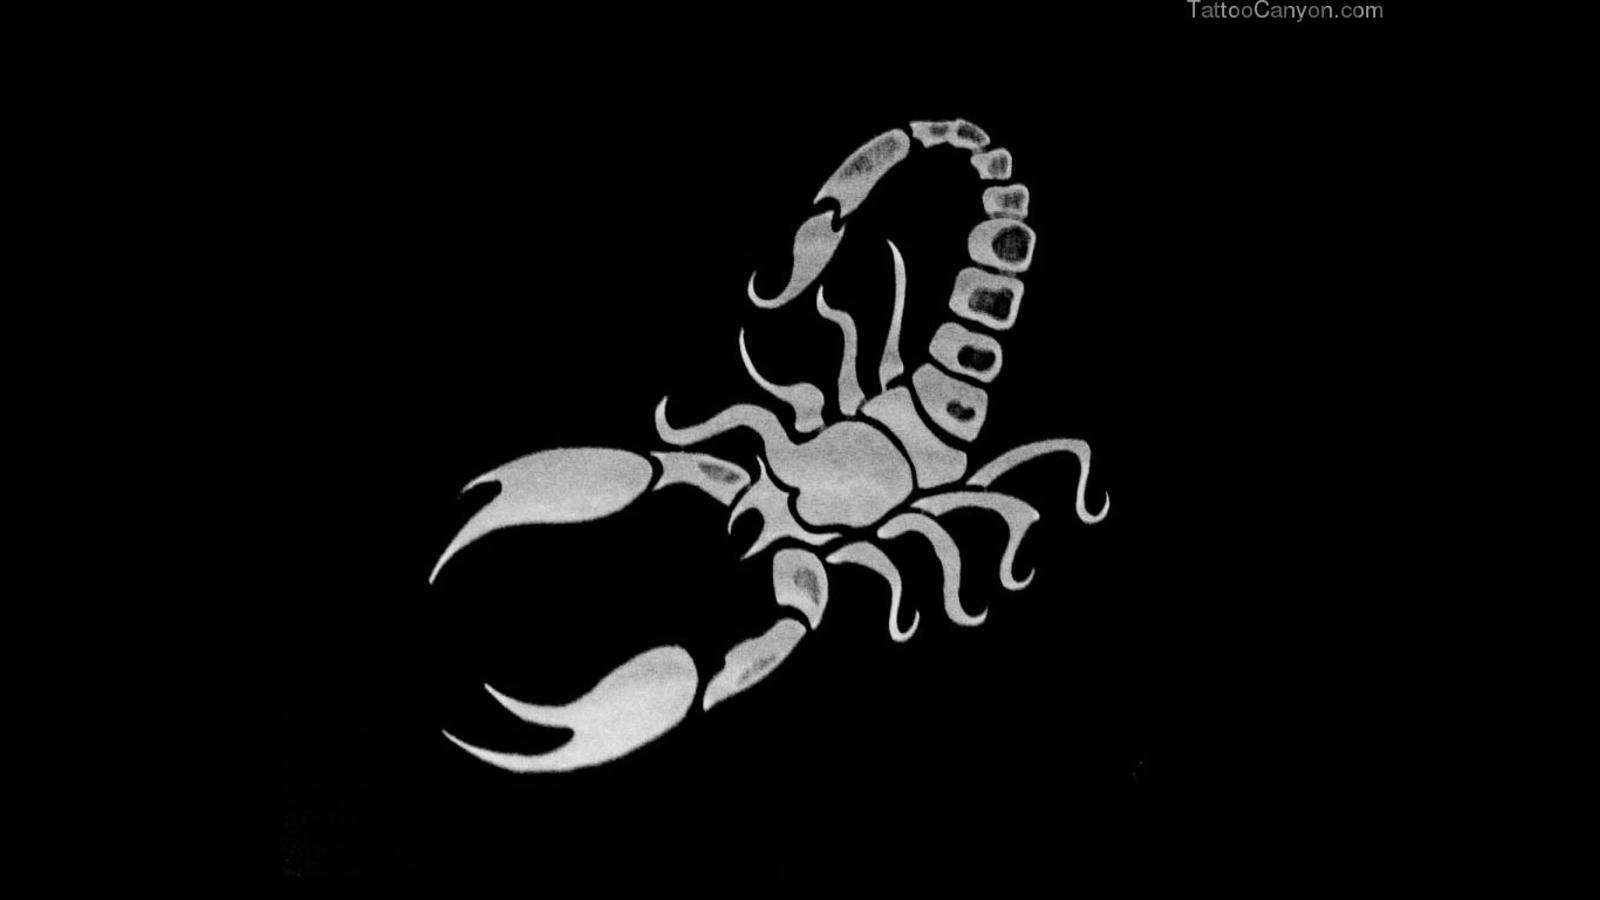 Scorpions Wallpaper HD Android Application